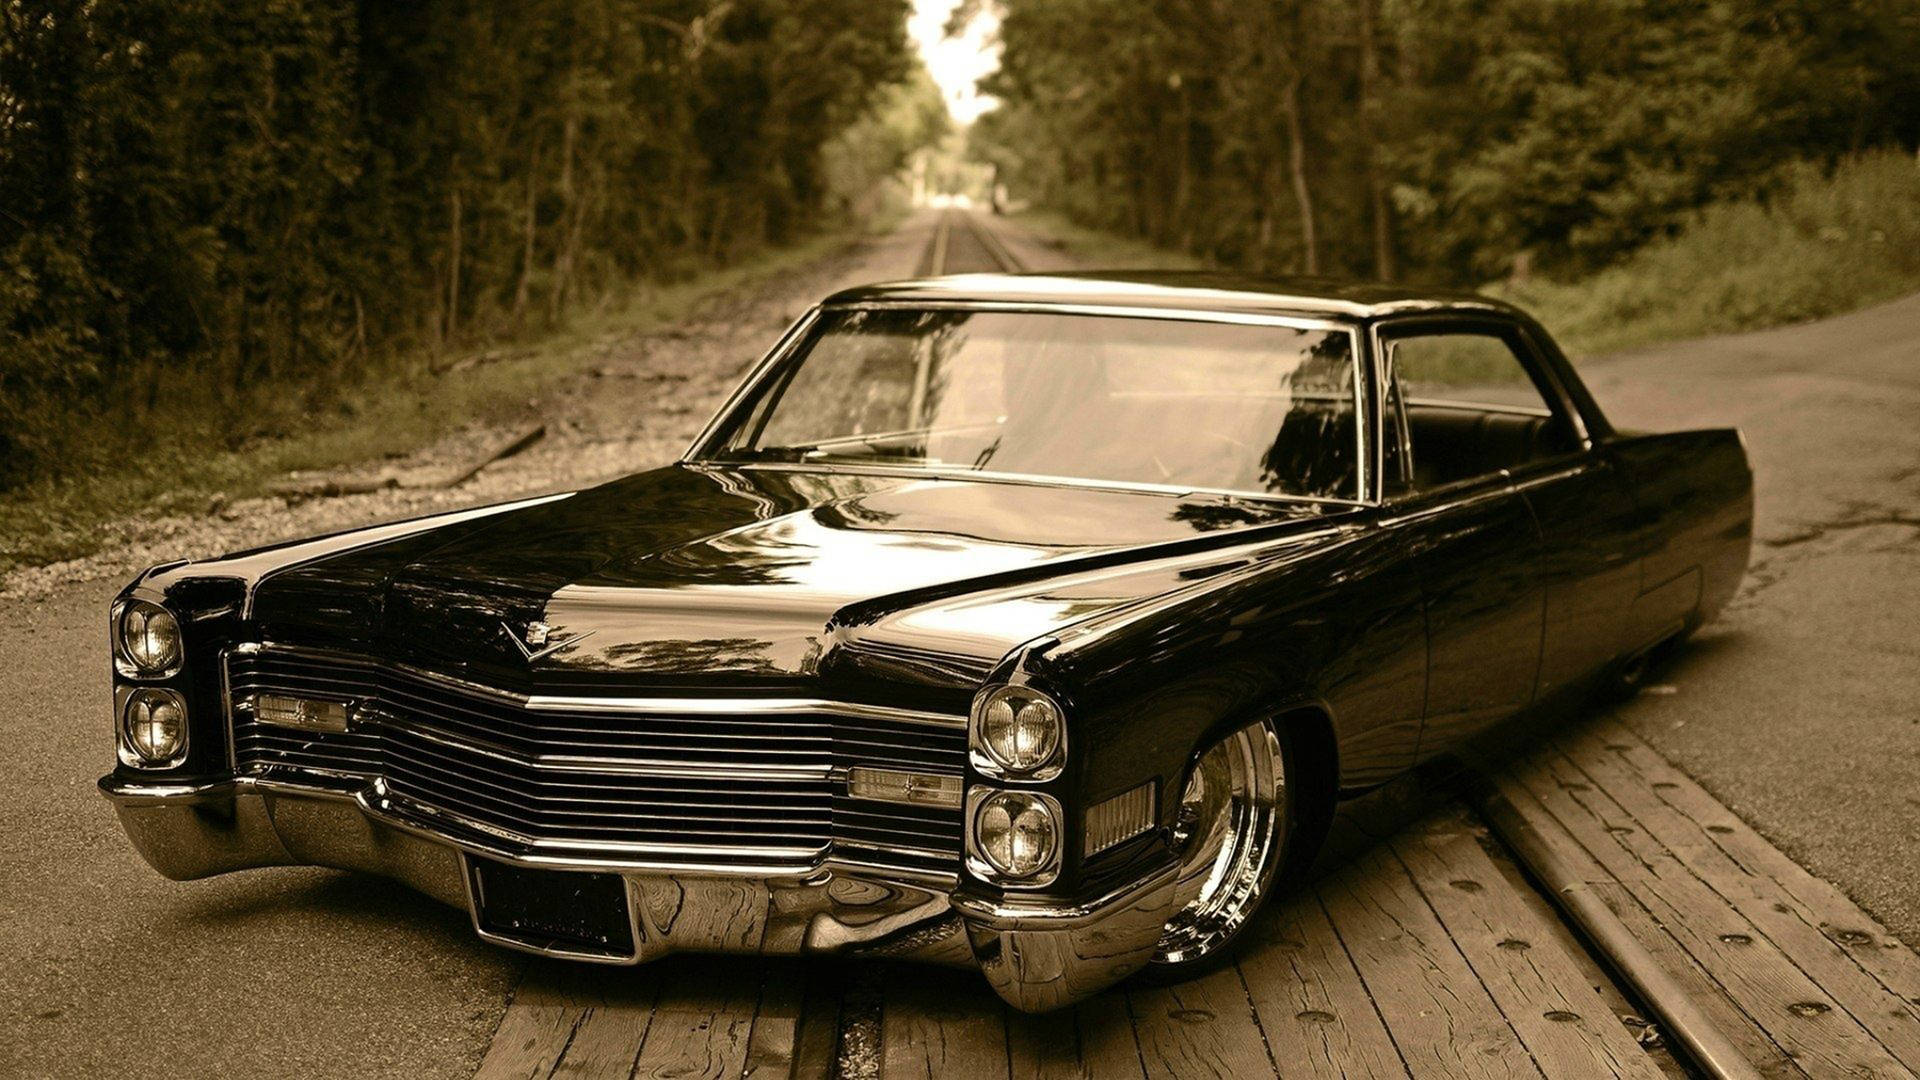 Shimmering Classic - The 1967 Chevrolet Impala Wallpaper